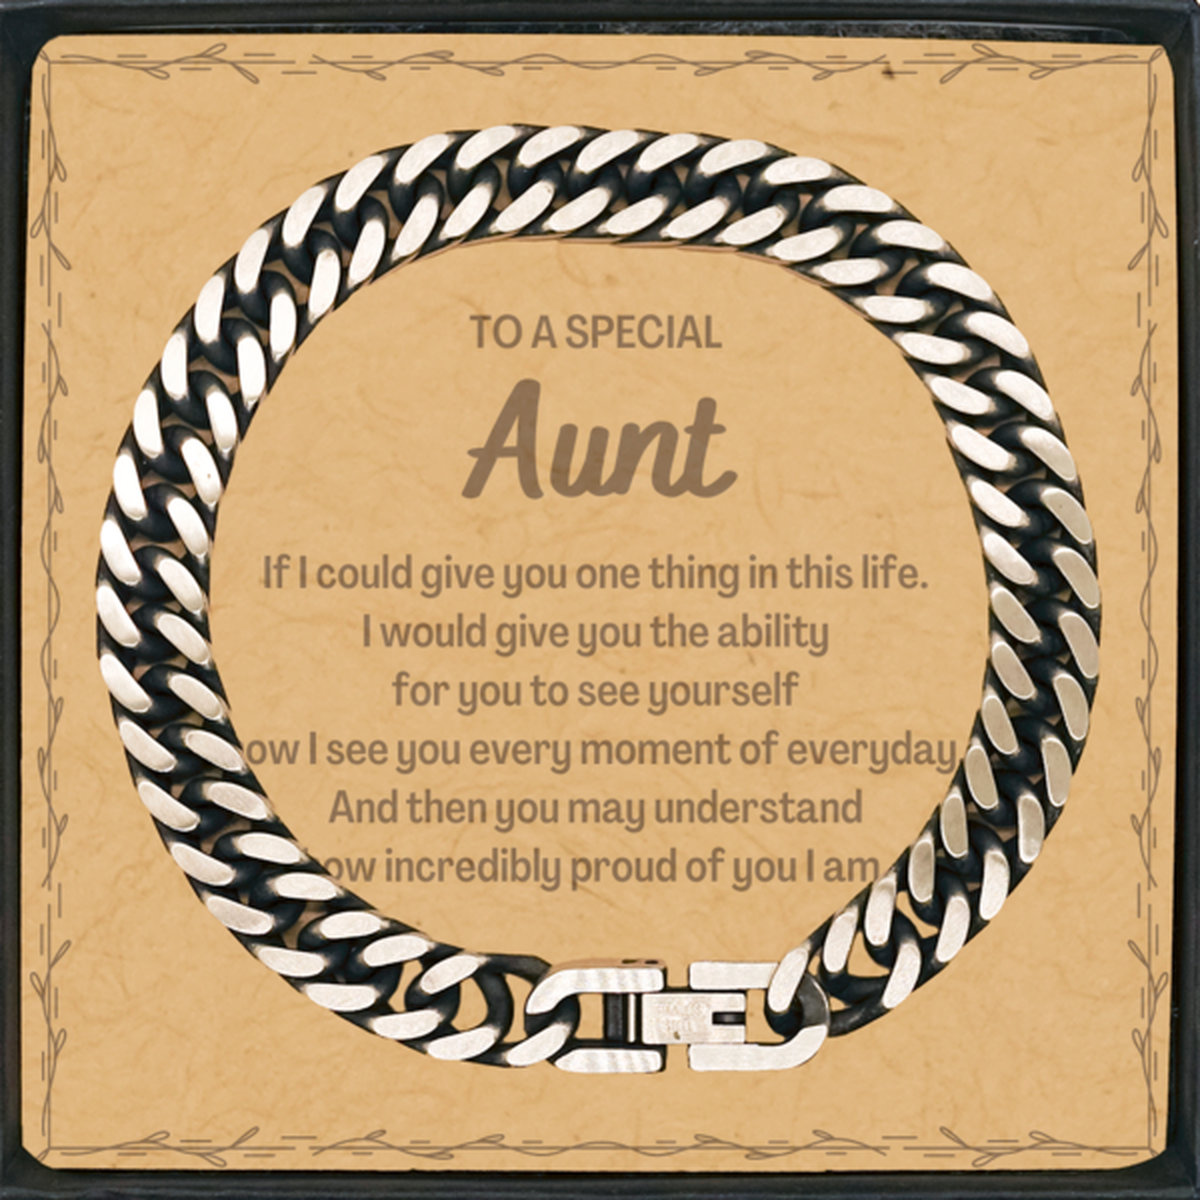 To My Aunt Cuban Link Chain Bracelet, Gifts For Aunt Message Card, Inspirational Gifts for Christmas Birthday, Epic Gifts for Aunt To A Special Aunt how incredibly proud of you I am